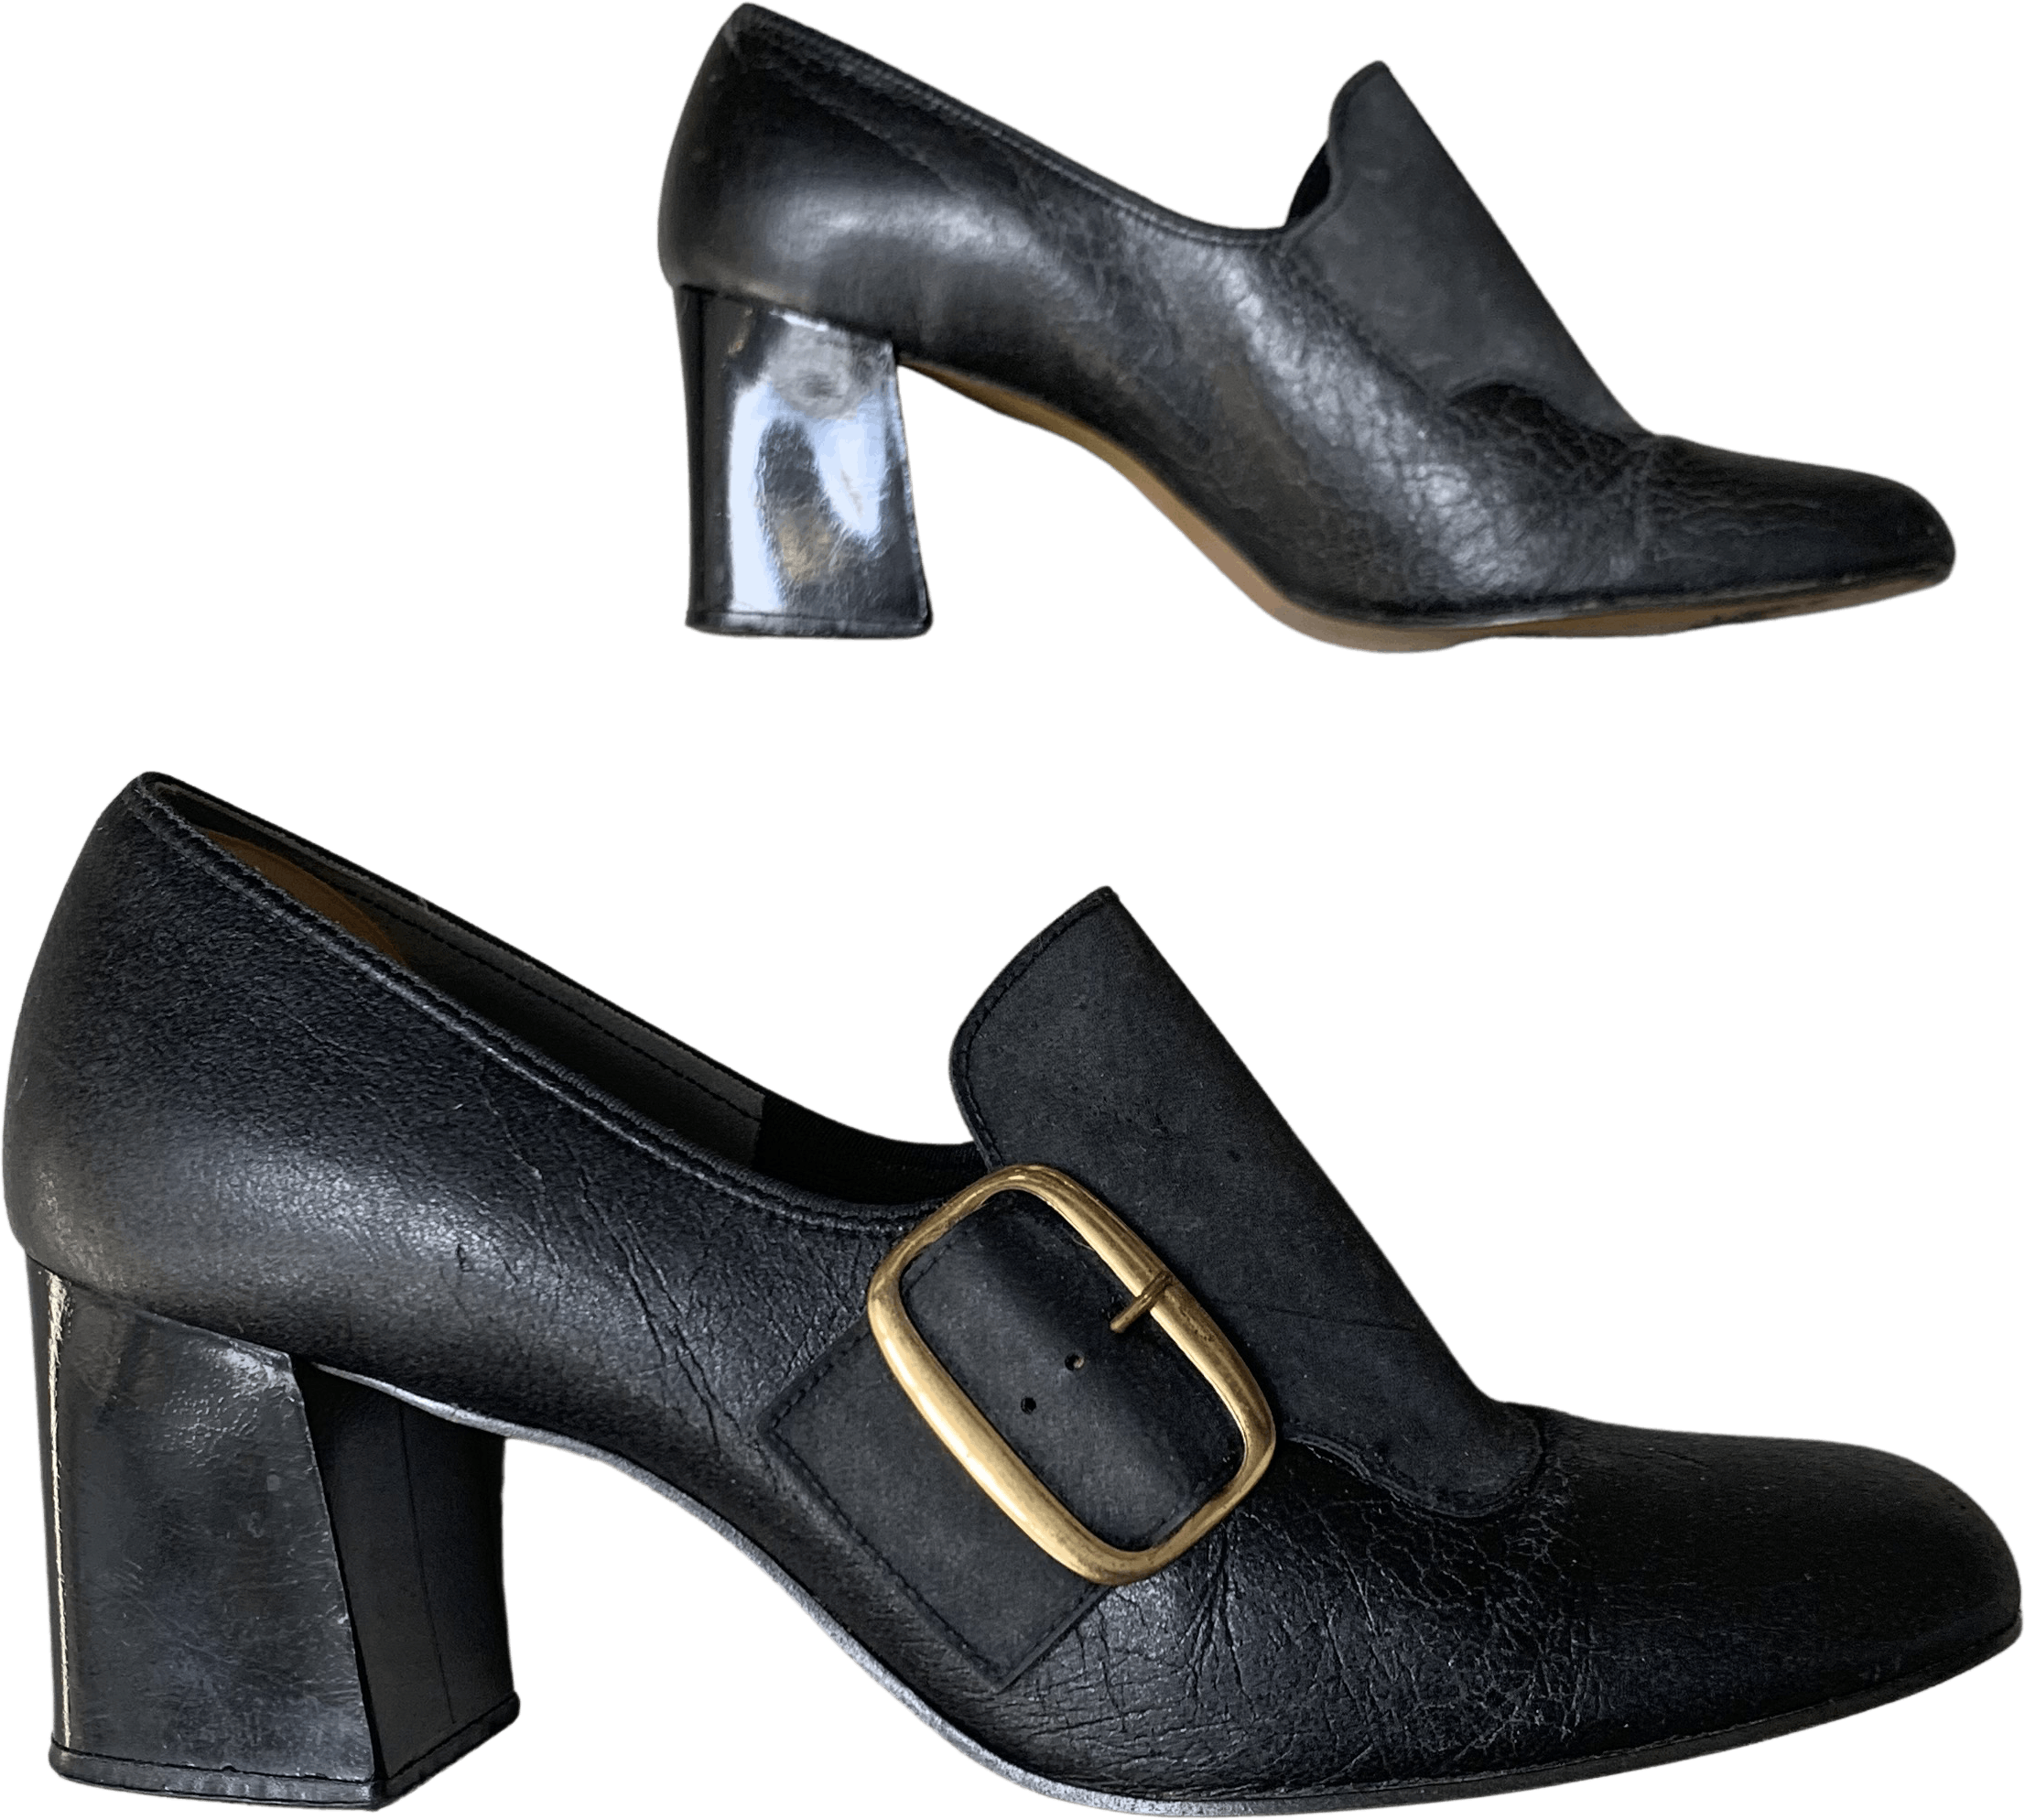 1980s Black Patent Leather Loafers With Wood Stacked Heel and 